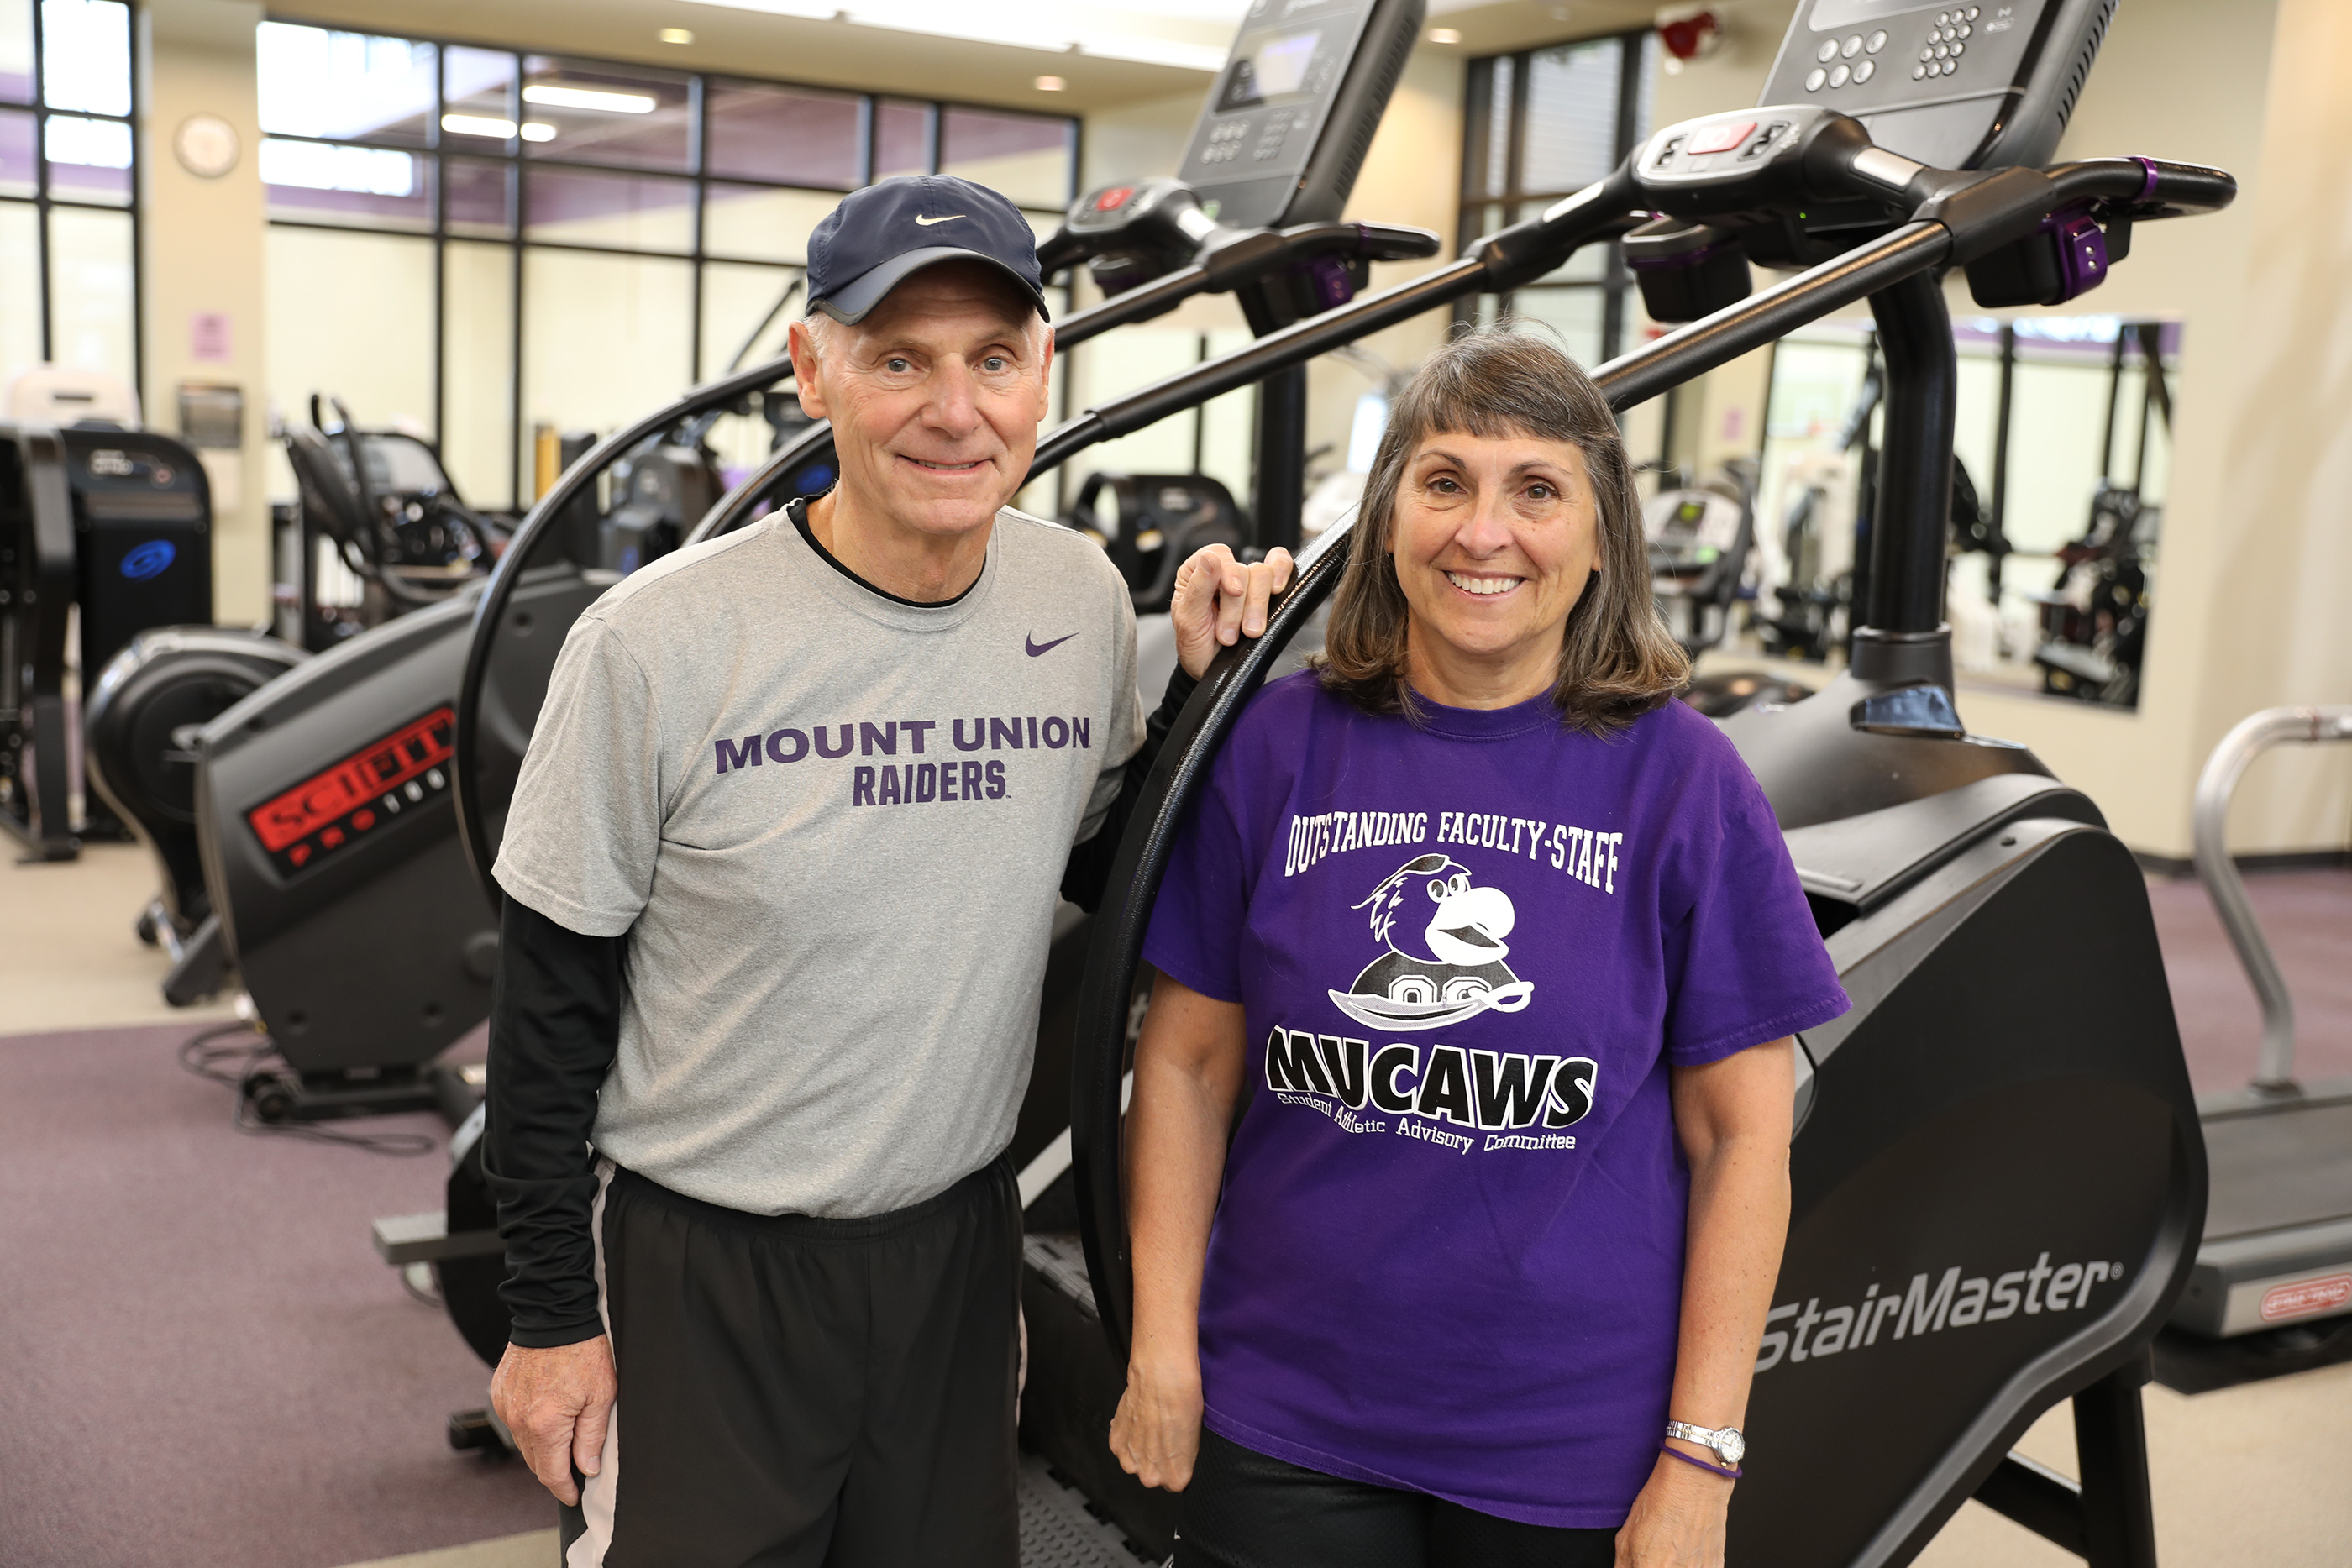 Dave ’69 and Debby (Betz ’73) Wolpert on Giving Back